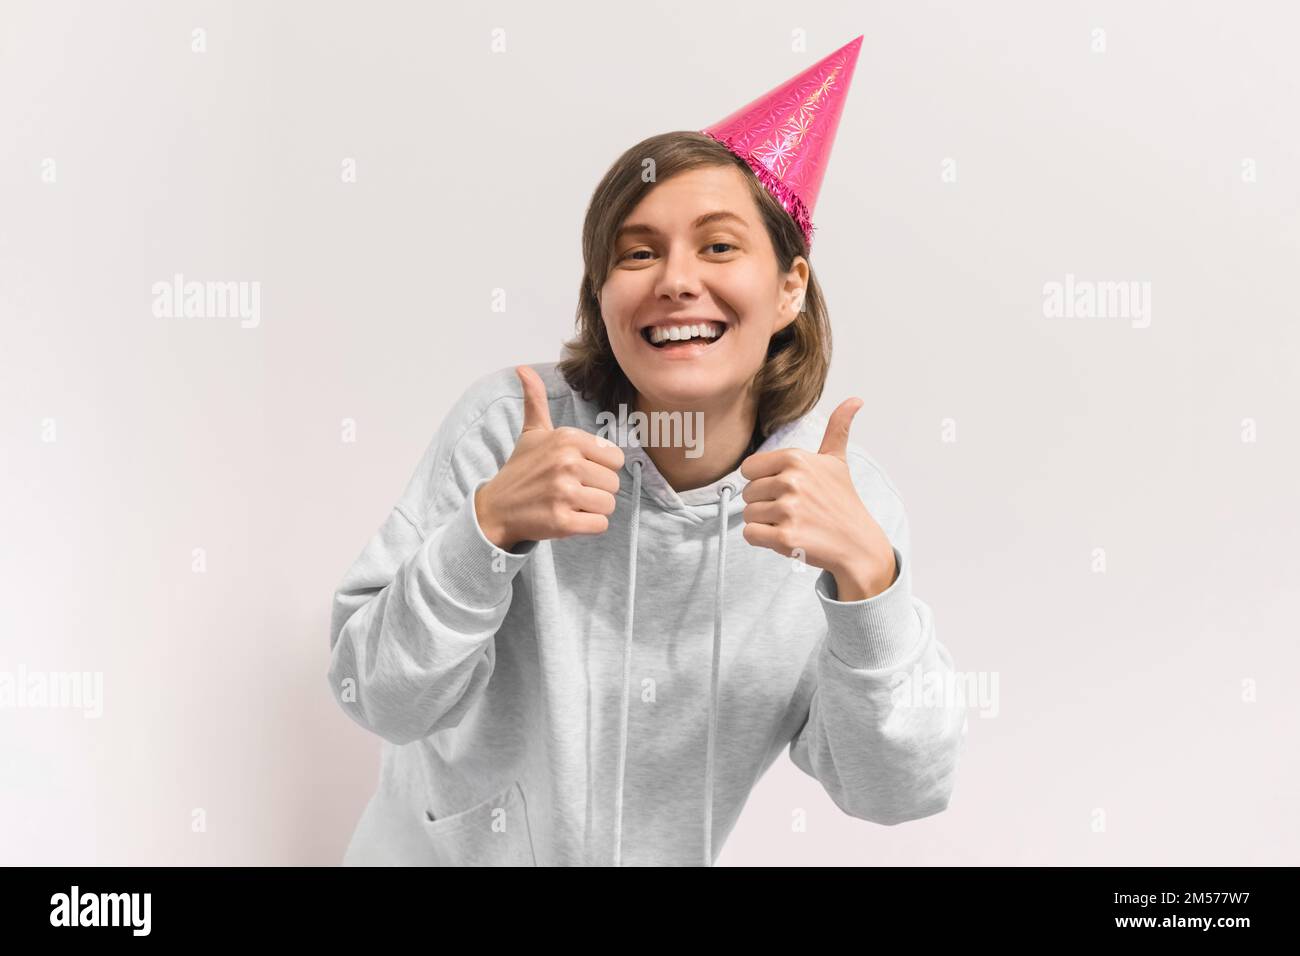 Young pretty woman in birthday hat laughing and rising her hands in Super gesture. Studio portrait of cheerful girl isolated on white background Stock Photo